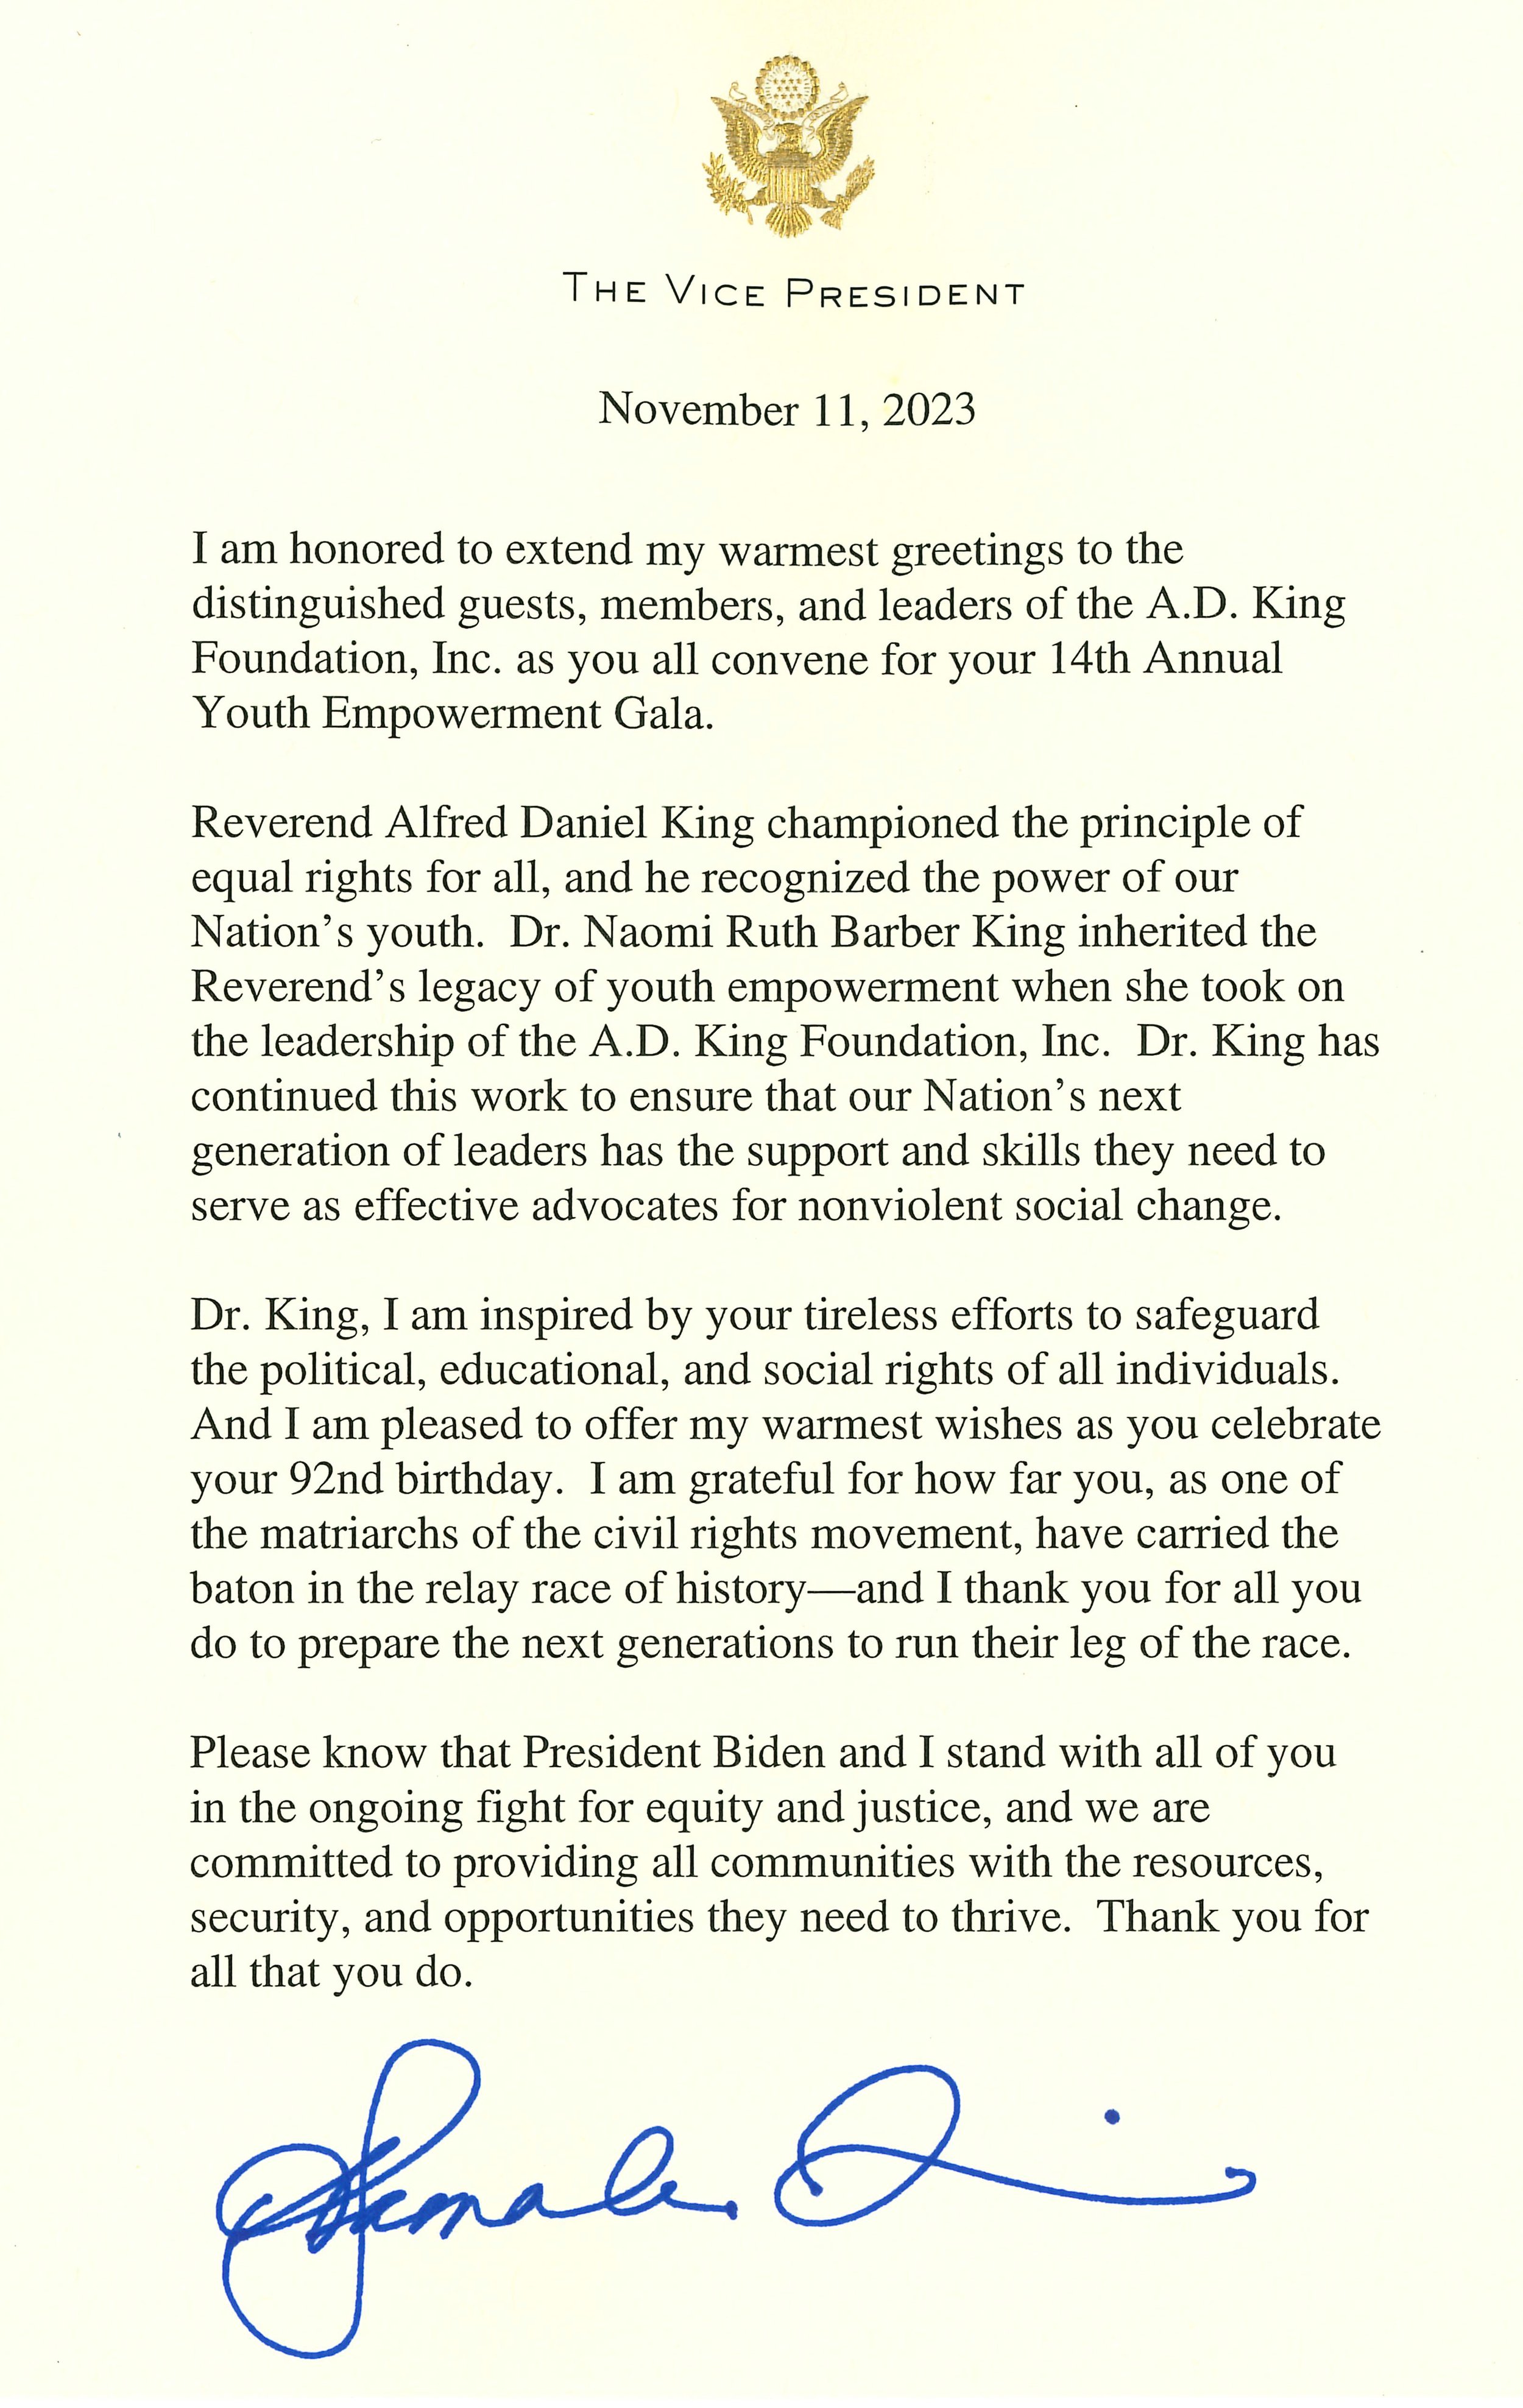 Letter from Vice President Kamala Harris for the A.D. King Foundation, Inc.jpg